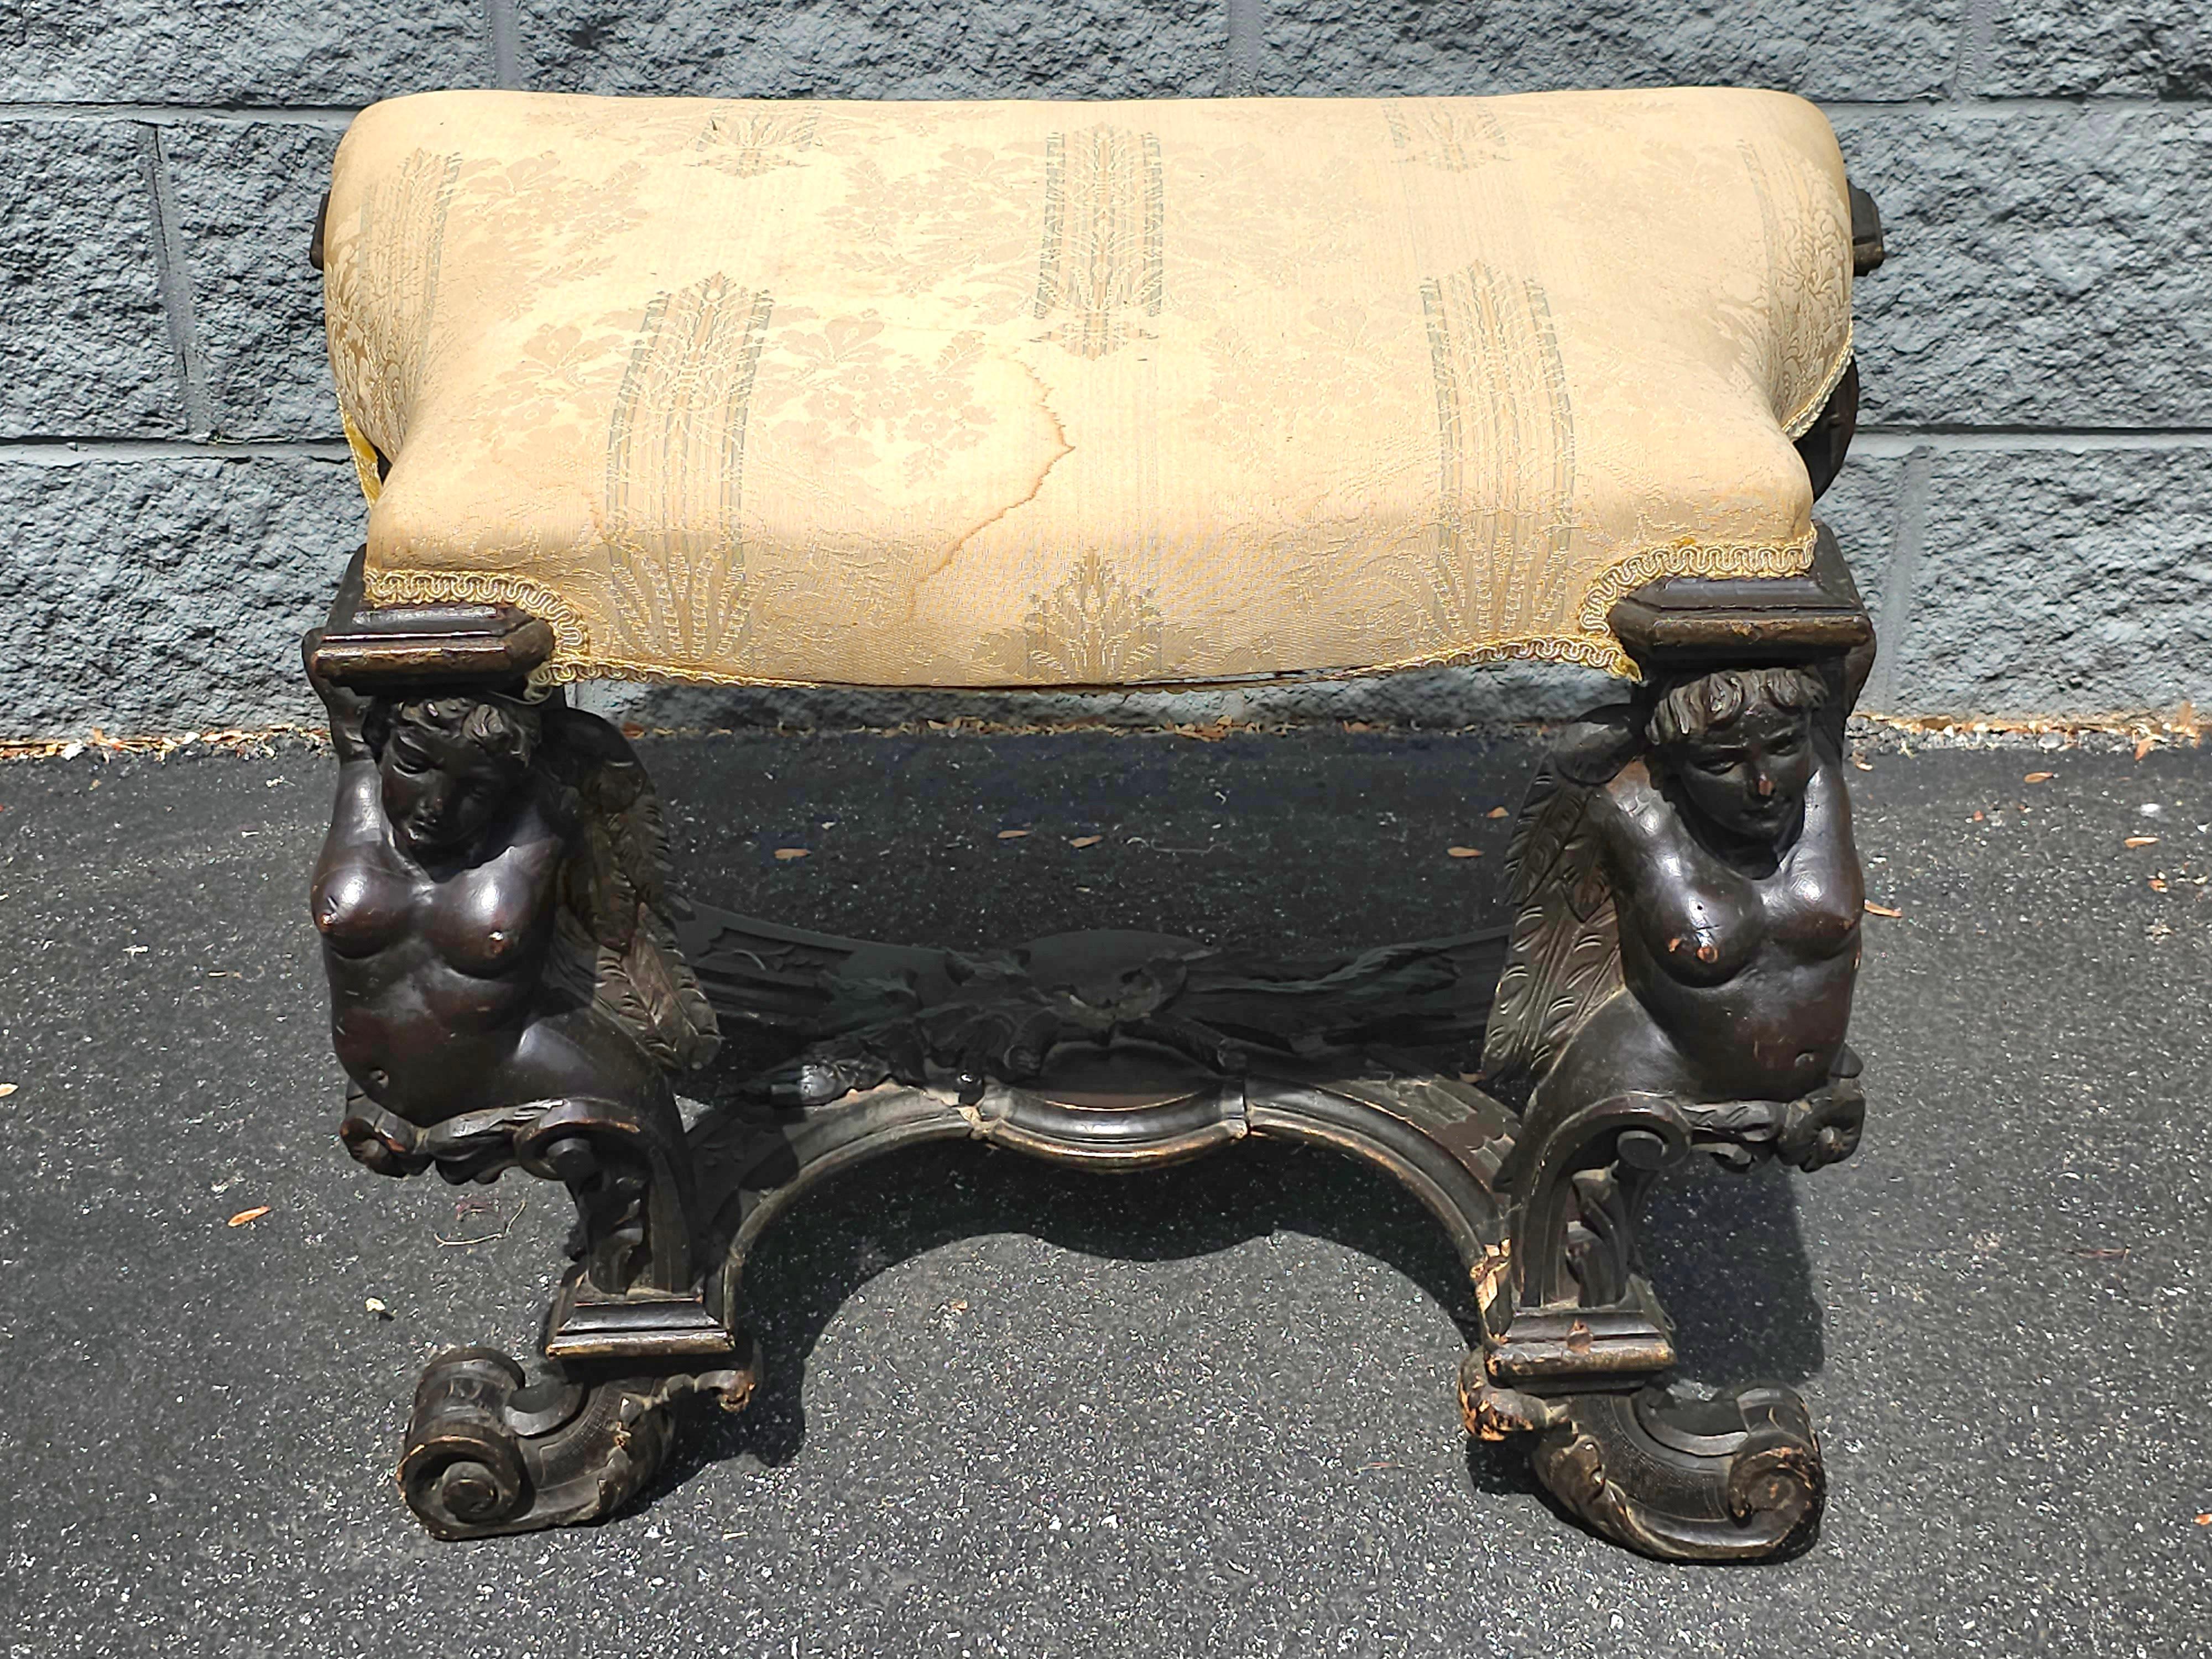 Italian Baroque Style Sculpted Walnut Figural Upholstered  Bench, Circa 18th In Good Condition For Sale In Germantown, MD